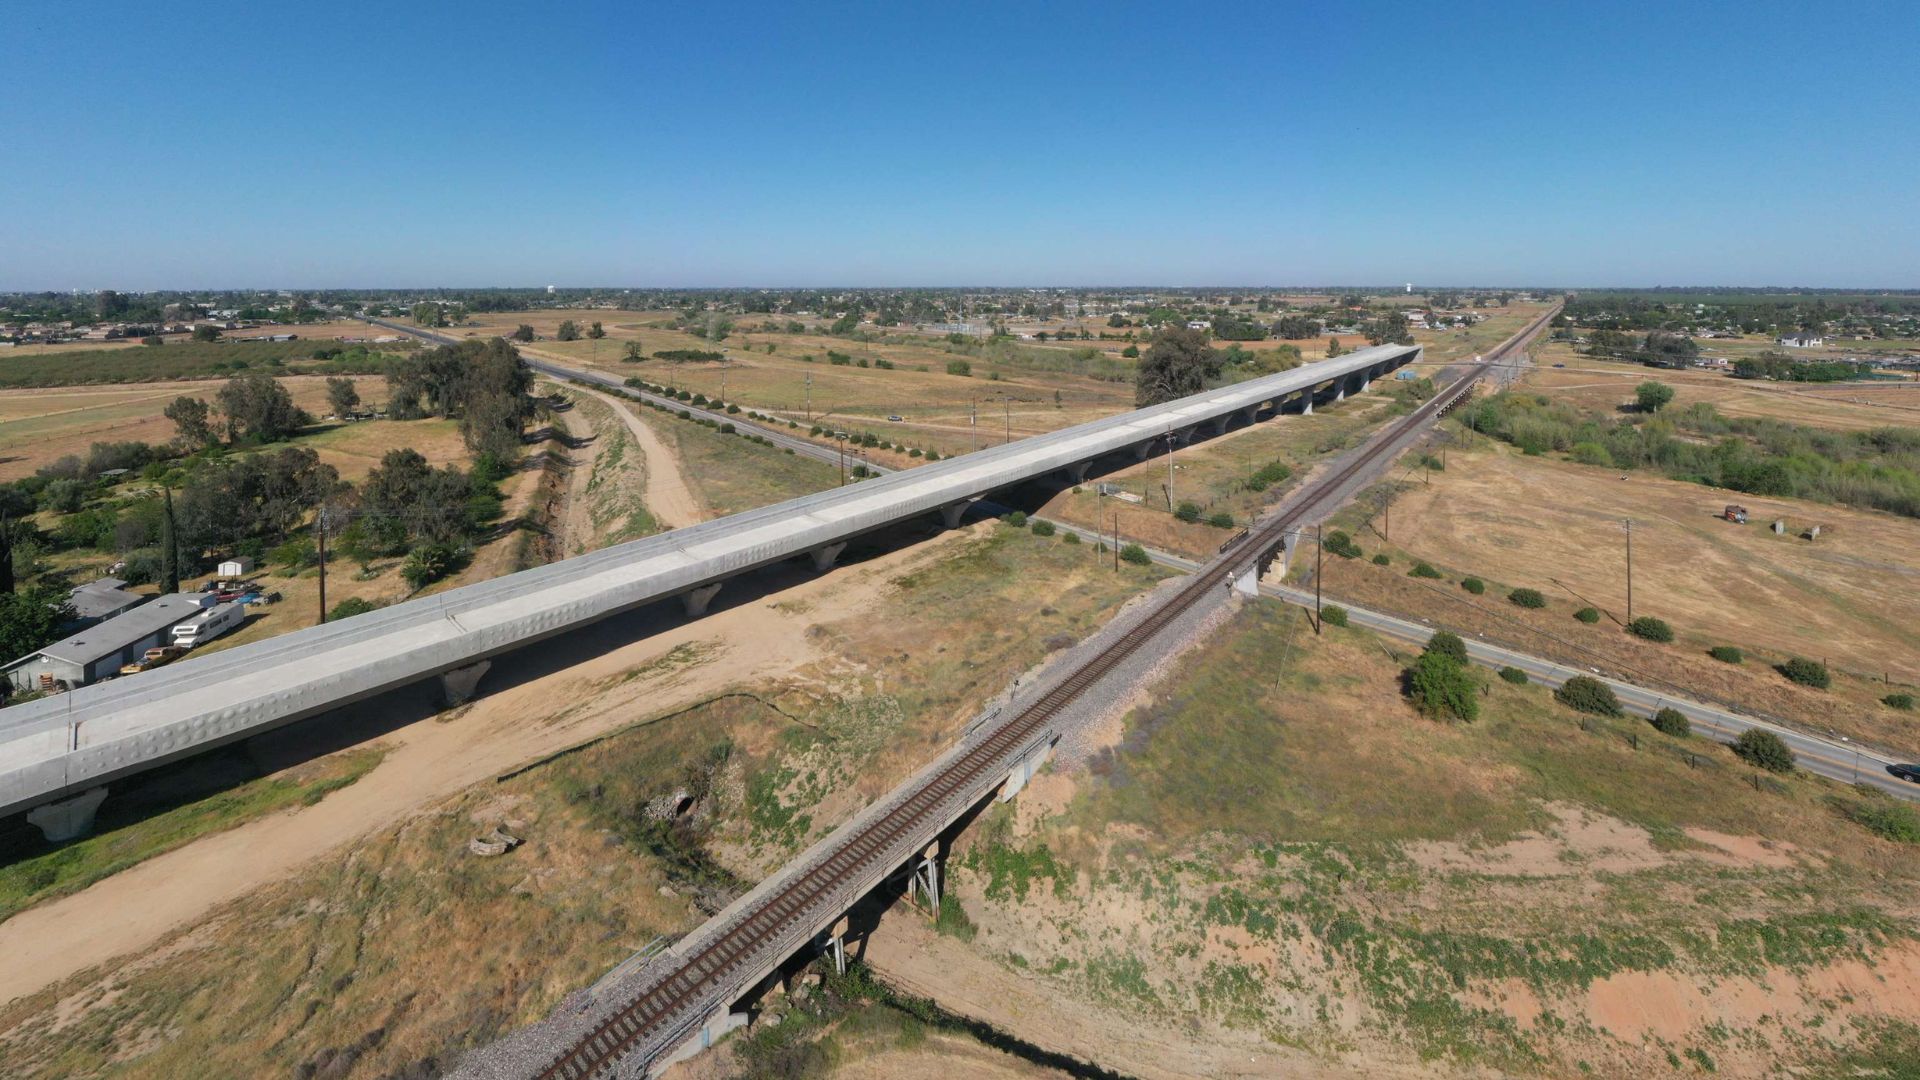 <p>The Fresno River Viaduct, one of the first completed structures of the high-speed rail system, spans nearly <a href="https://nypost.com/2024/05/04/us-news/california-mocked-over-high-speed-rail-bridge-to-nowhere-that-took-9-years-to-build/">1,600 feet</a>.  </p> <p>This structure is designed to let trains travel over the riverbed and run alongside the BNSF Railroad, yet it stands as a solitary achievement amidst broader project delays.   </p>